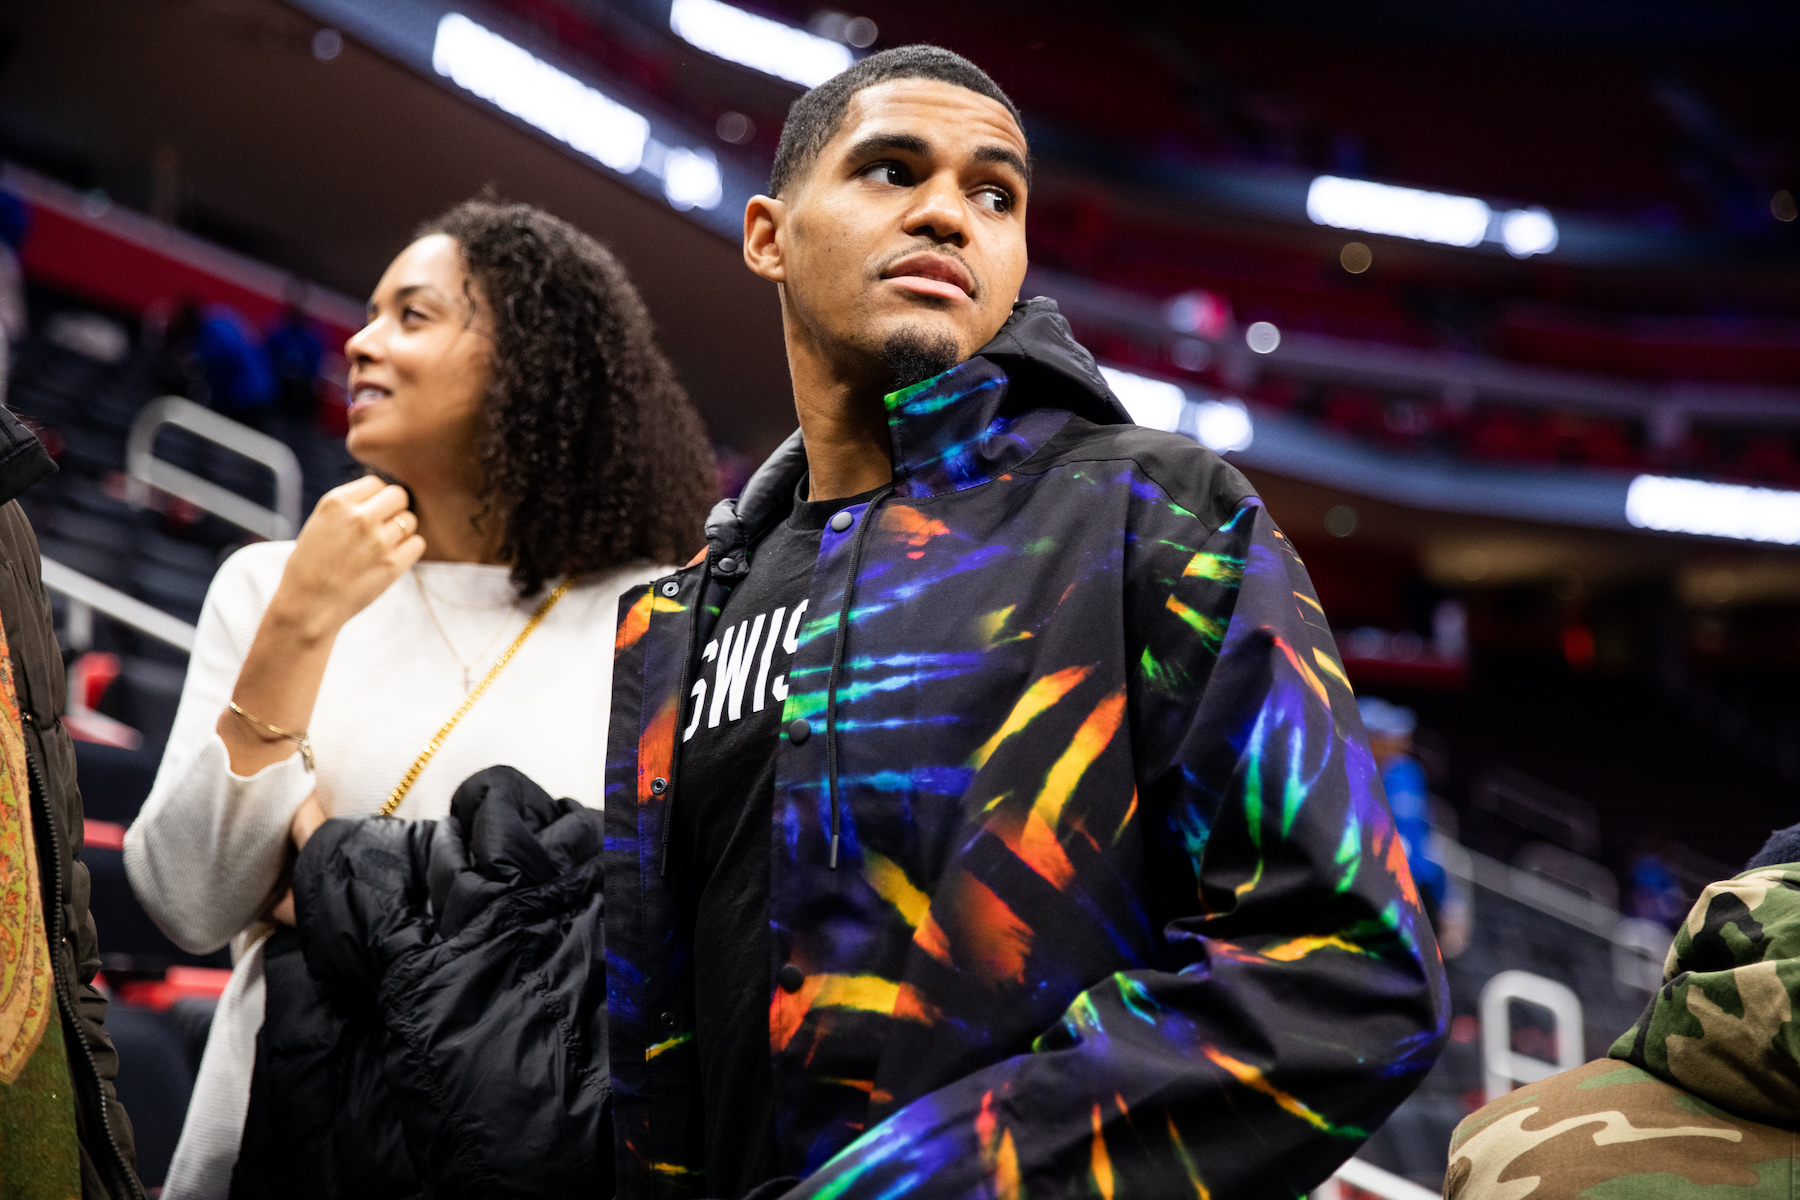 76ers Player Tobias Harris Says His Life Was ‘Sugar-Coated’ Compared to Other Black People